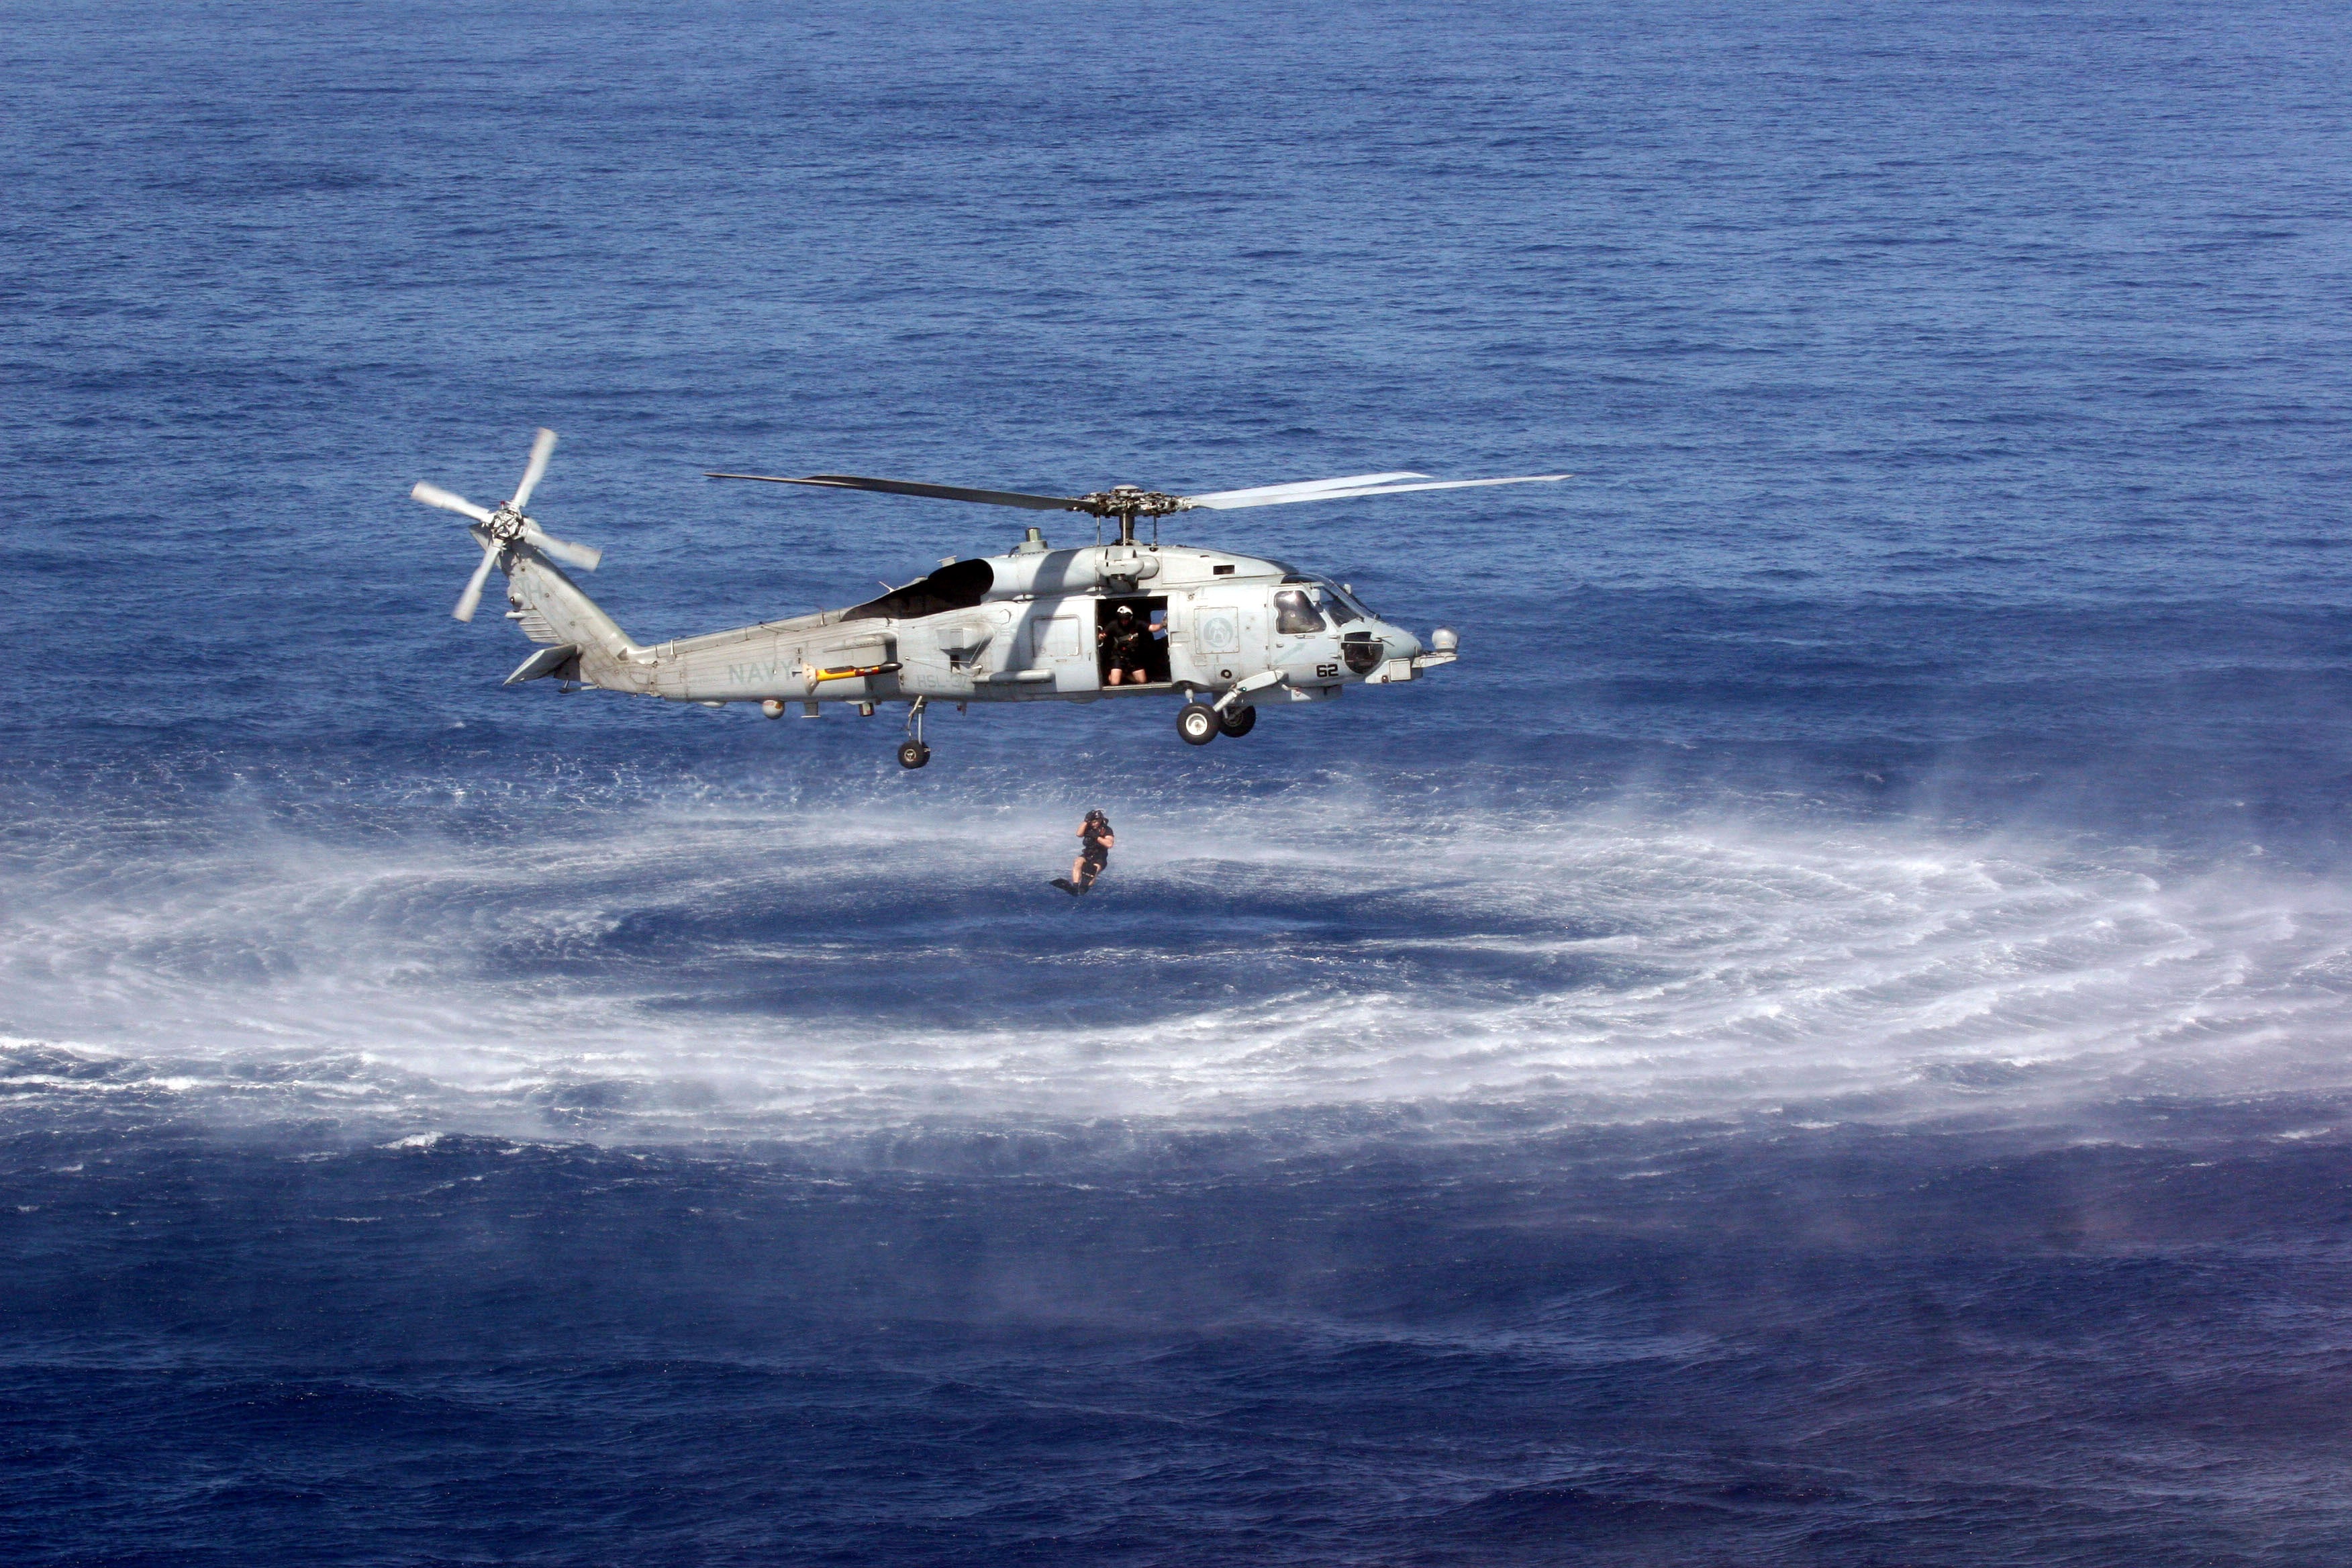 Helocasting in the sea photo